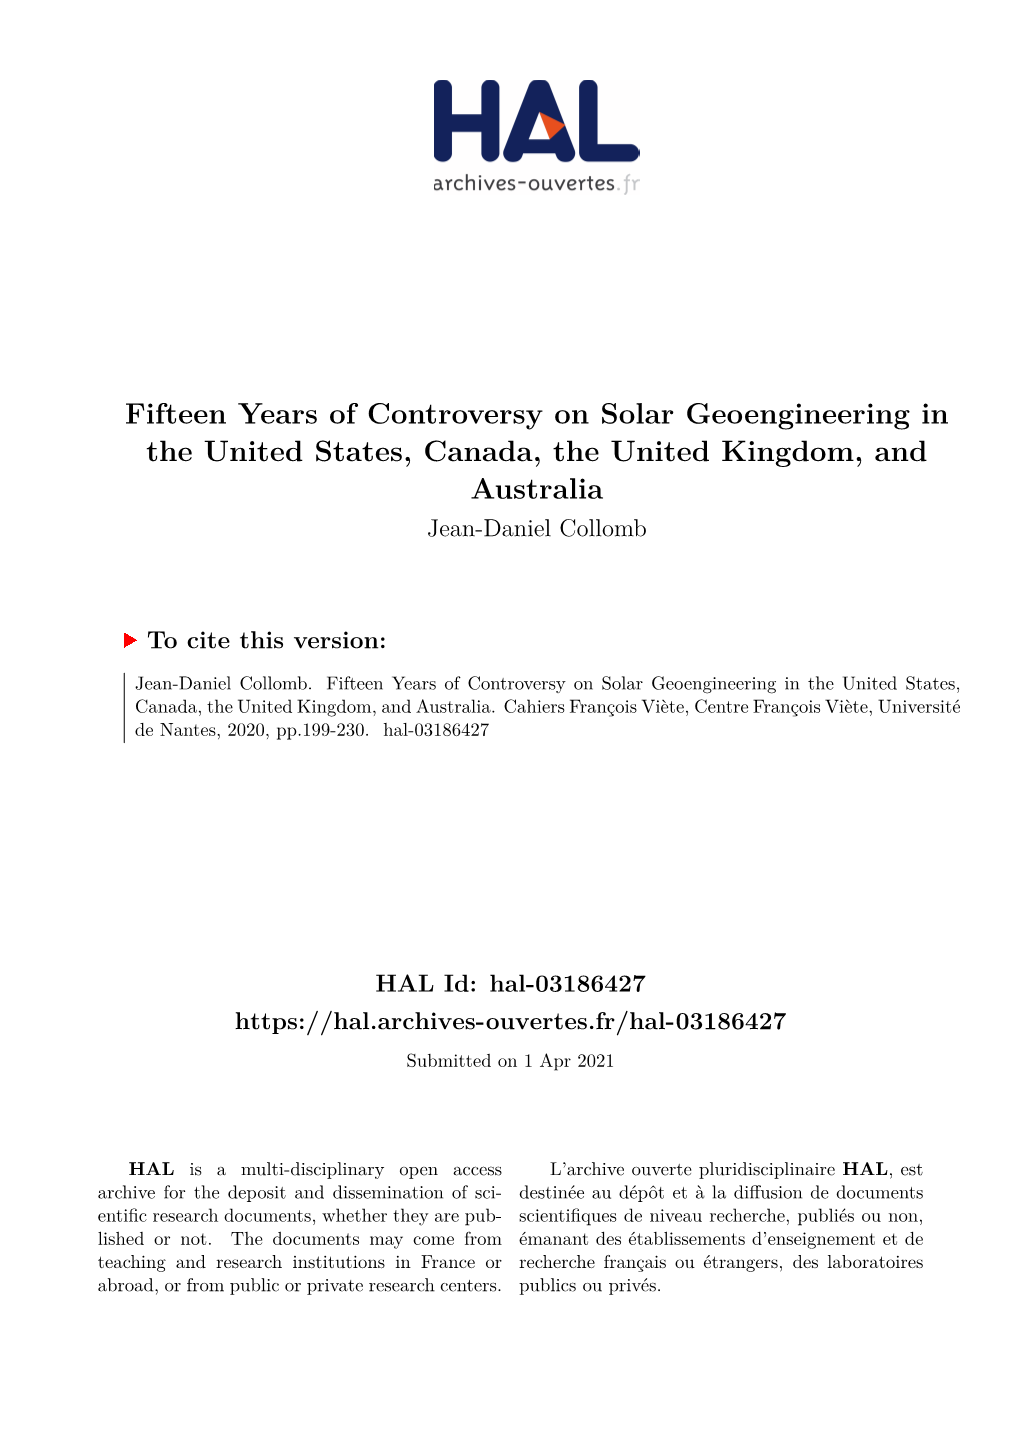 Fifteen Years of Controversy on Solar Geoengineering in the United States, Canada, the United Kingdom, and Australia Jean-Daniel Collomb